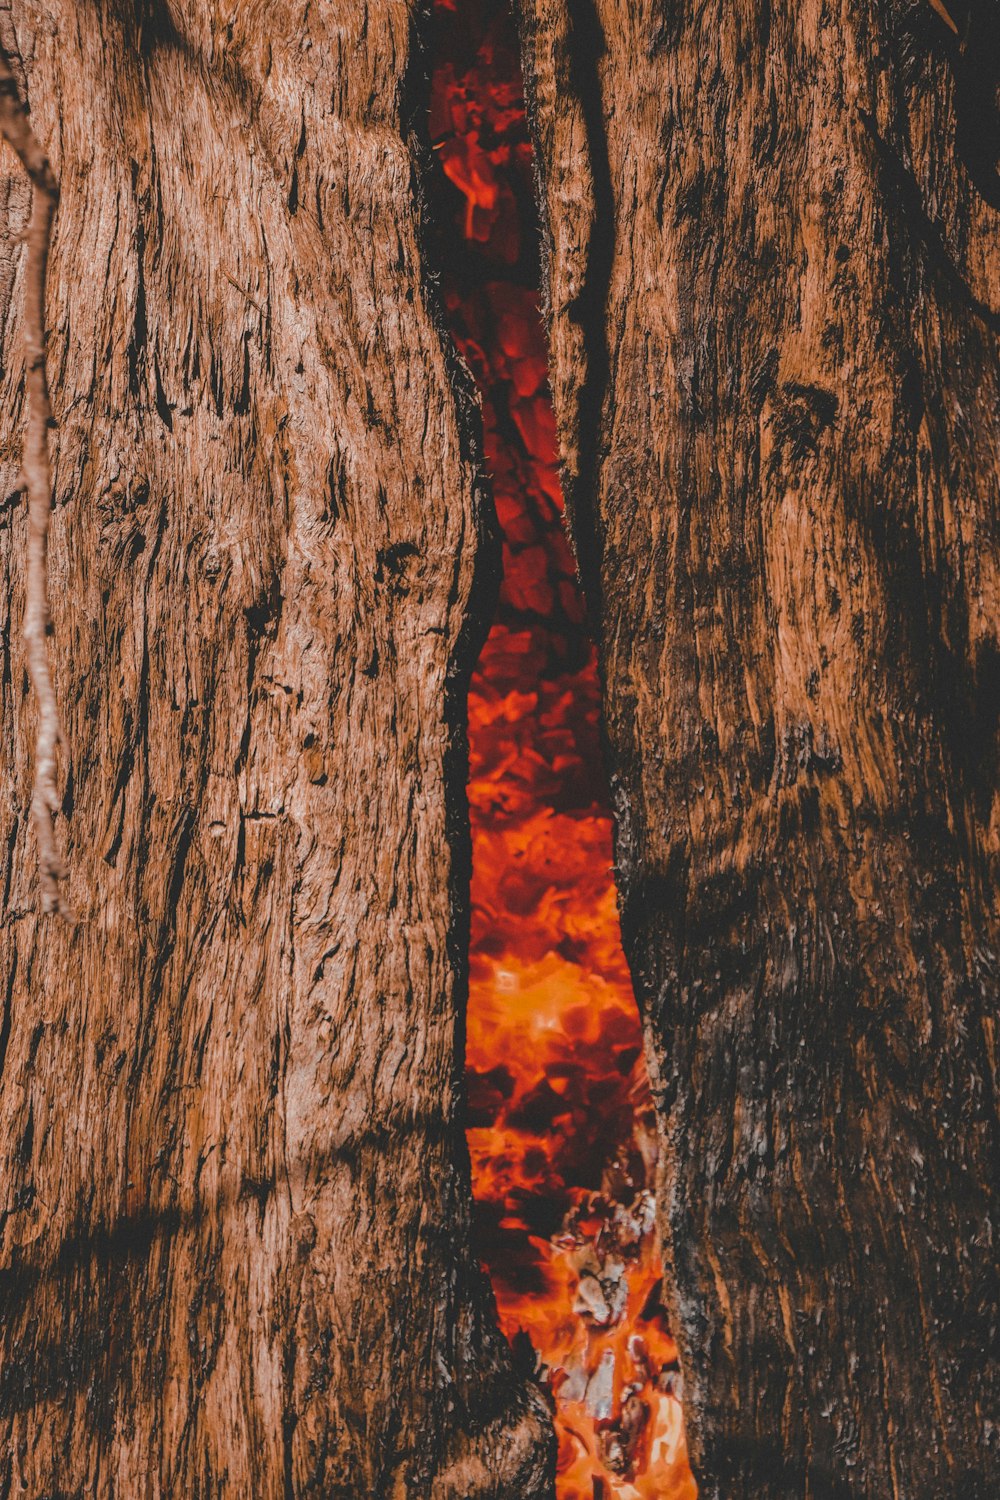 a close up of a red substance in a tree